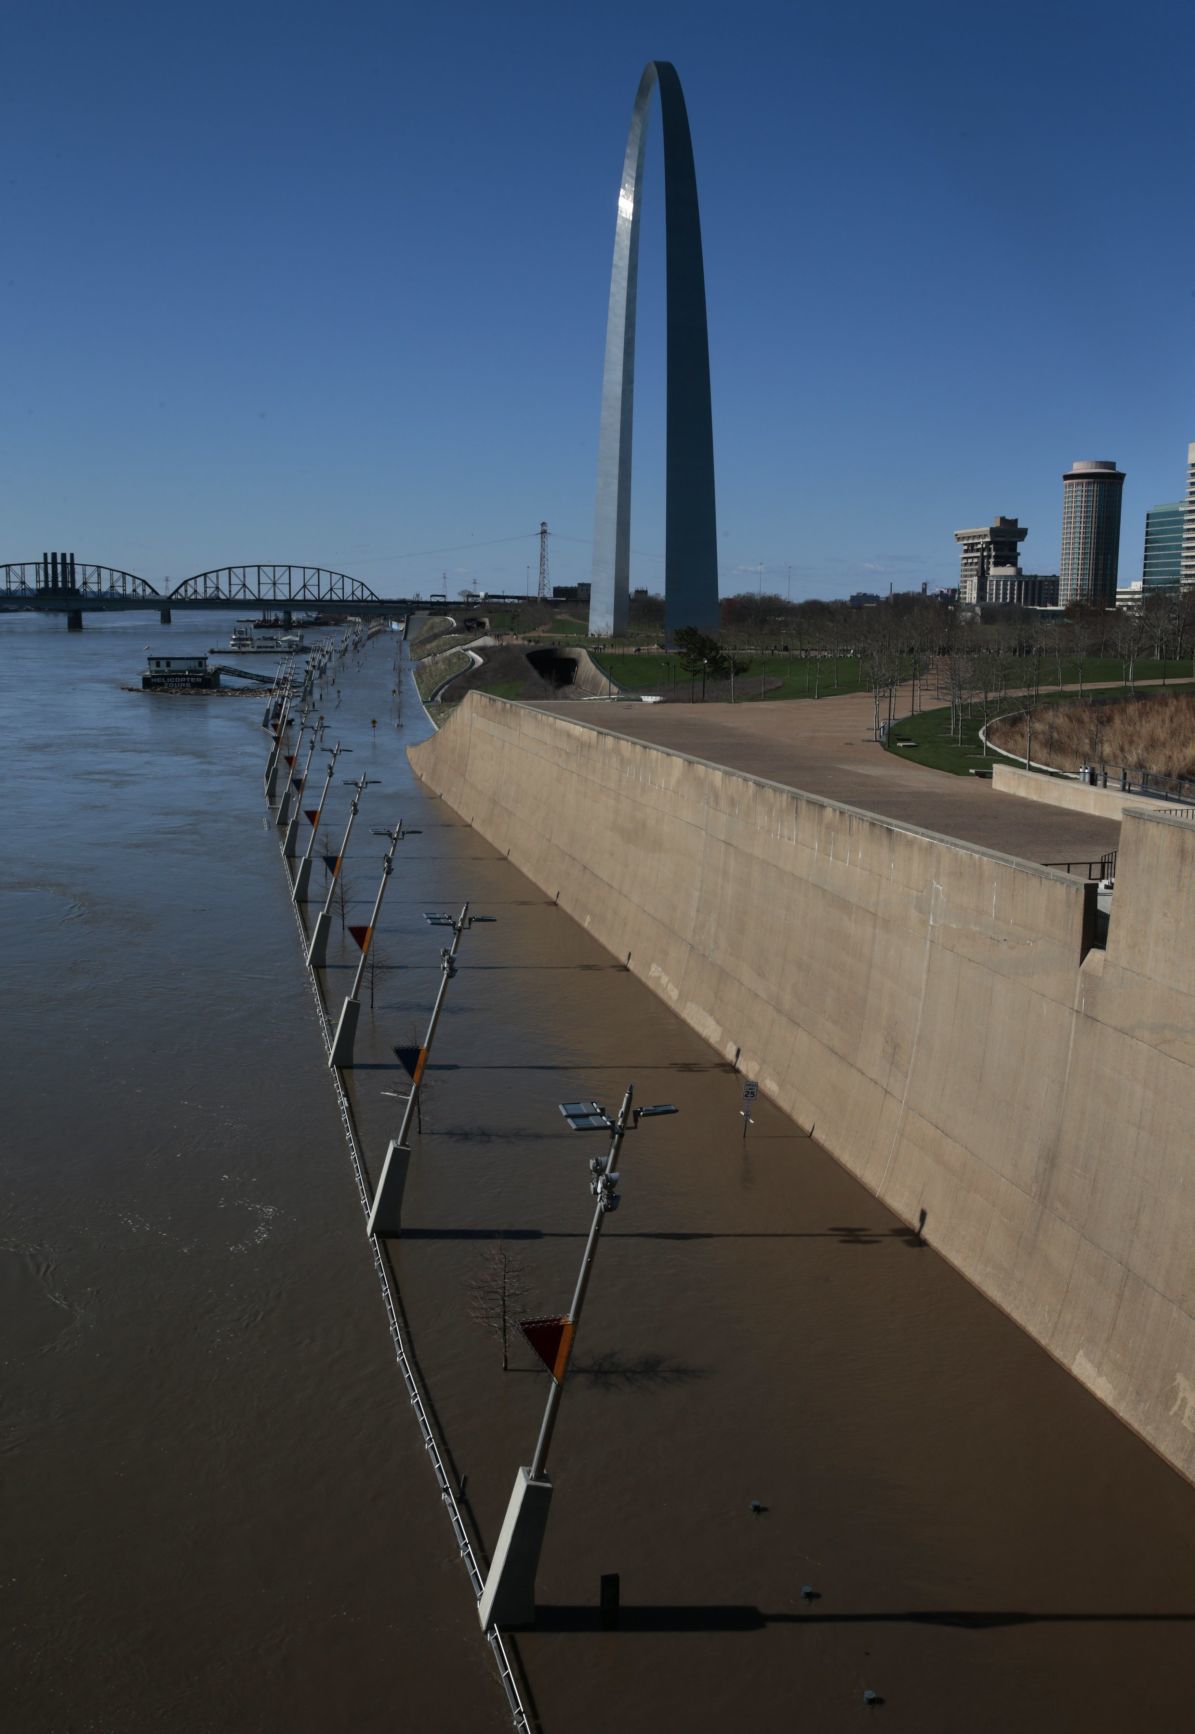 Floodwaters continue to rise in St. Louis area, with rivers cresting this week | Metro ...